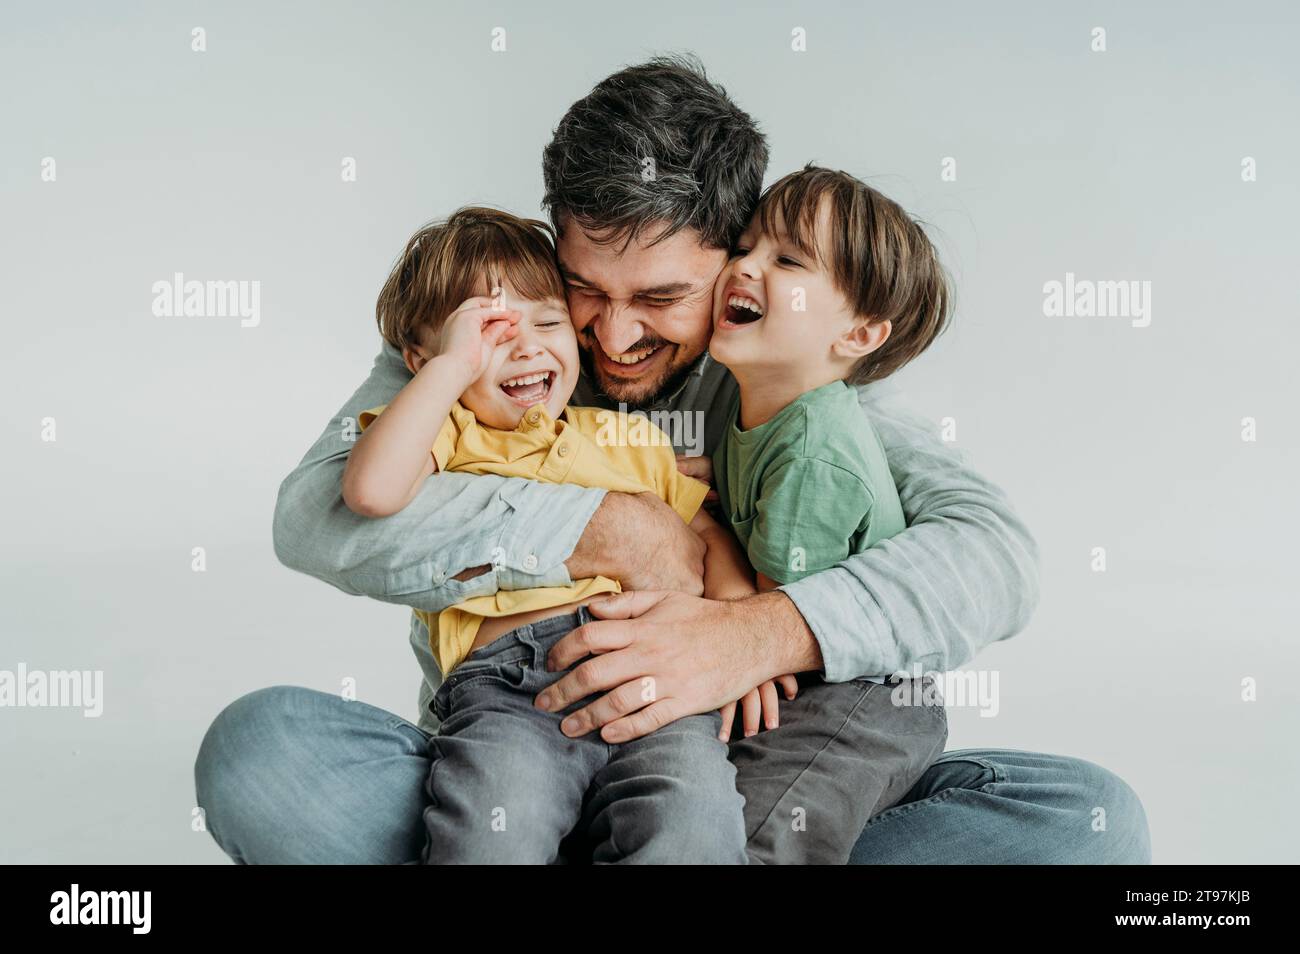 Happy father having fun and hugging children against white background Stock Photo